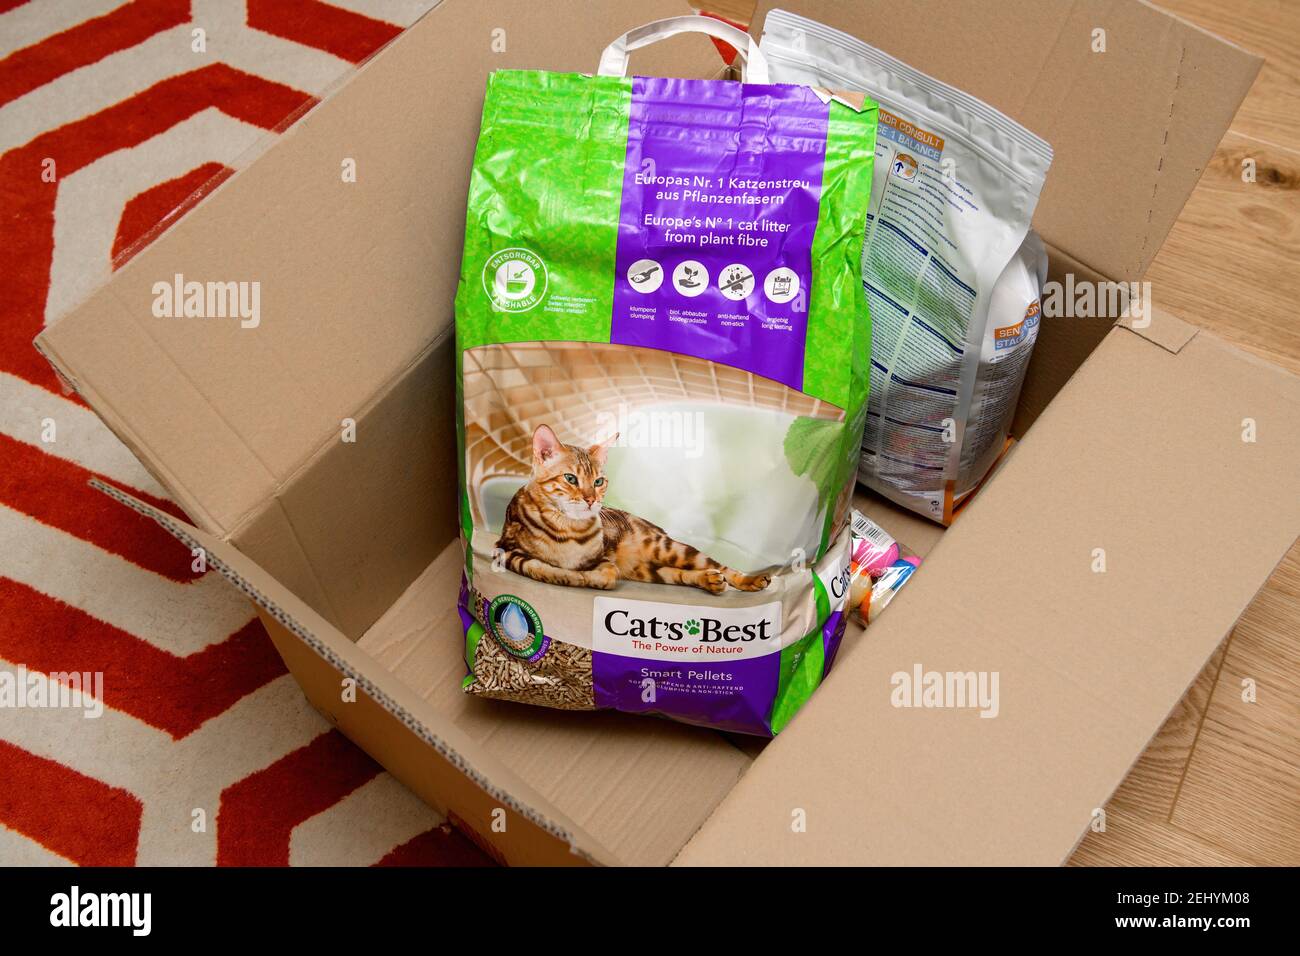 Strasbourg, France - Jan 16, 2021: Overhead view of Living room carpet with cardboard box delivery containing Cats Best litter wood bio organic and Royal Canin Senior Consult stage cat's food Stock Photo